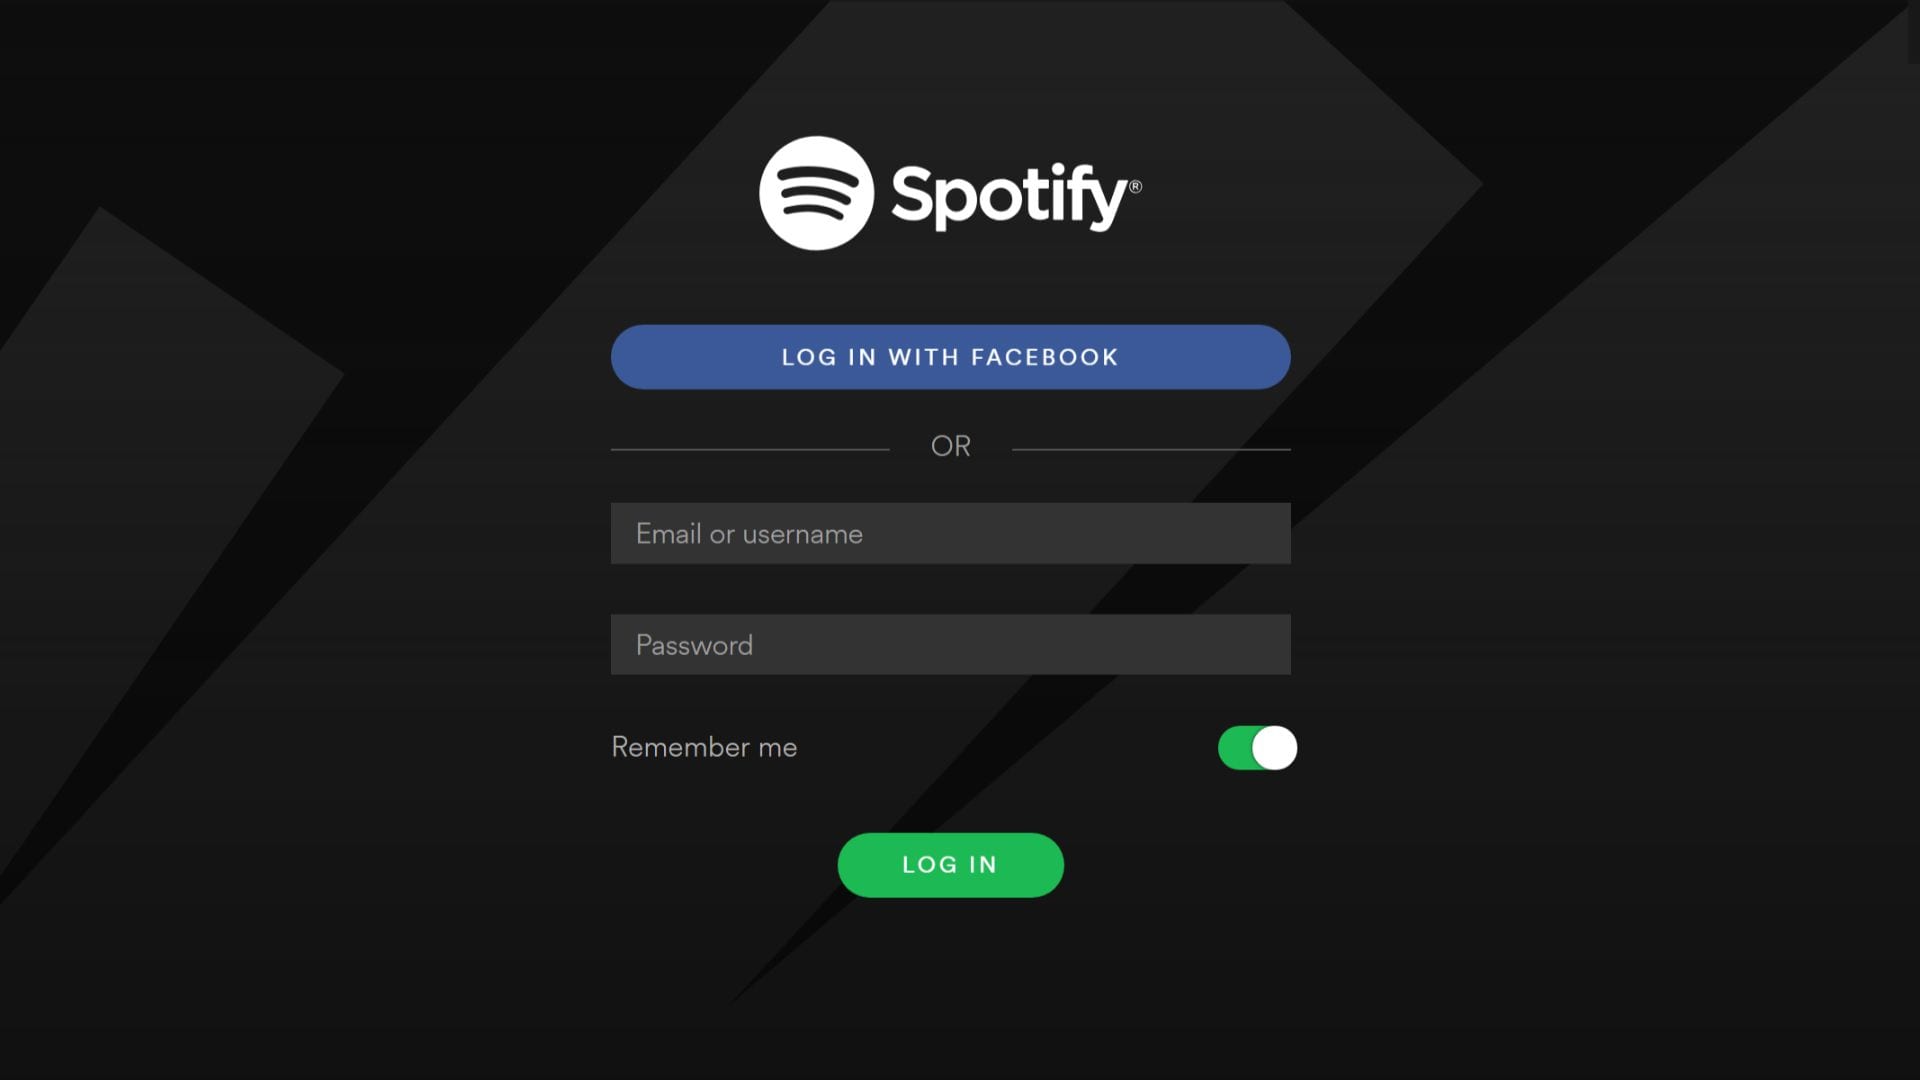 Spotify search working on web but not computer app 2018 download